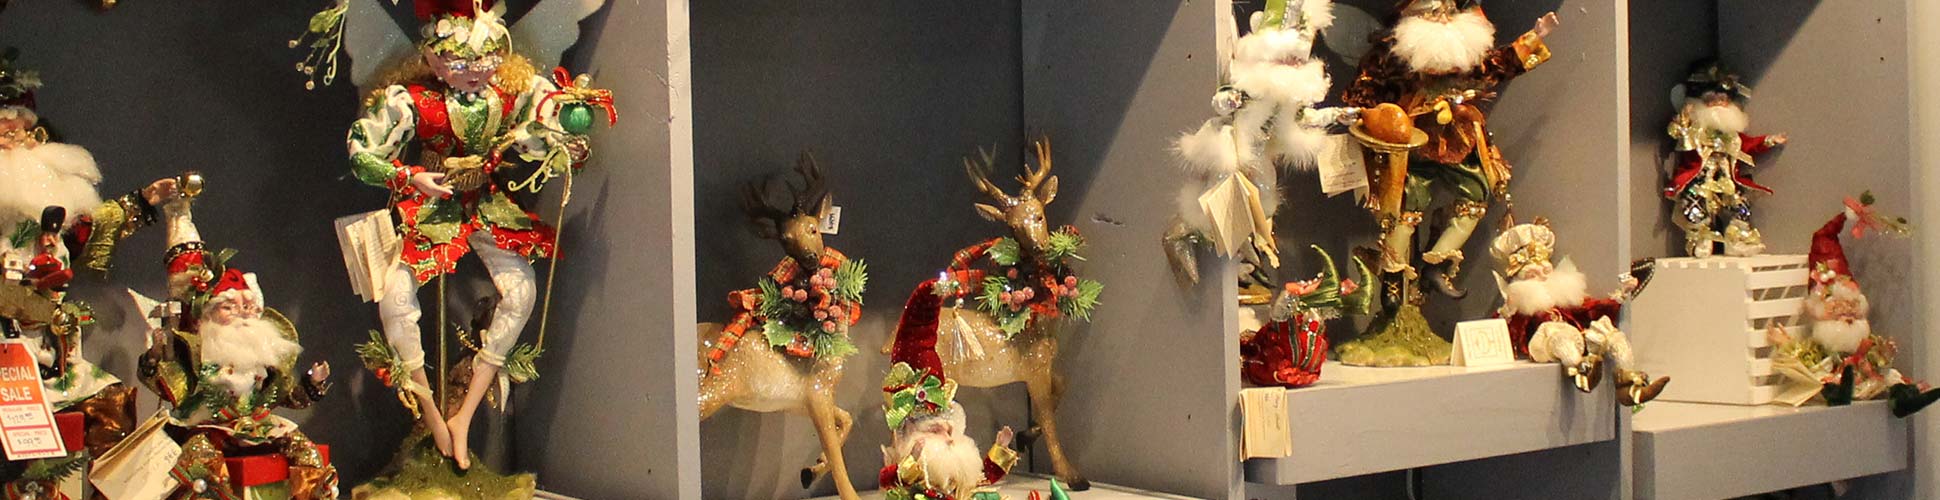 Large collection of Mark Roberts fairies for sale on display shelves in Cincinnati, OH